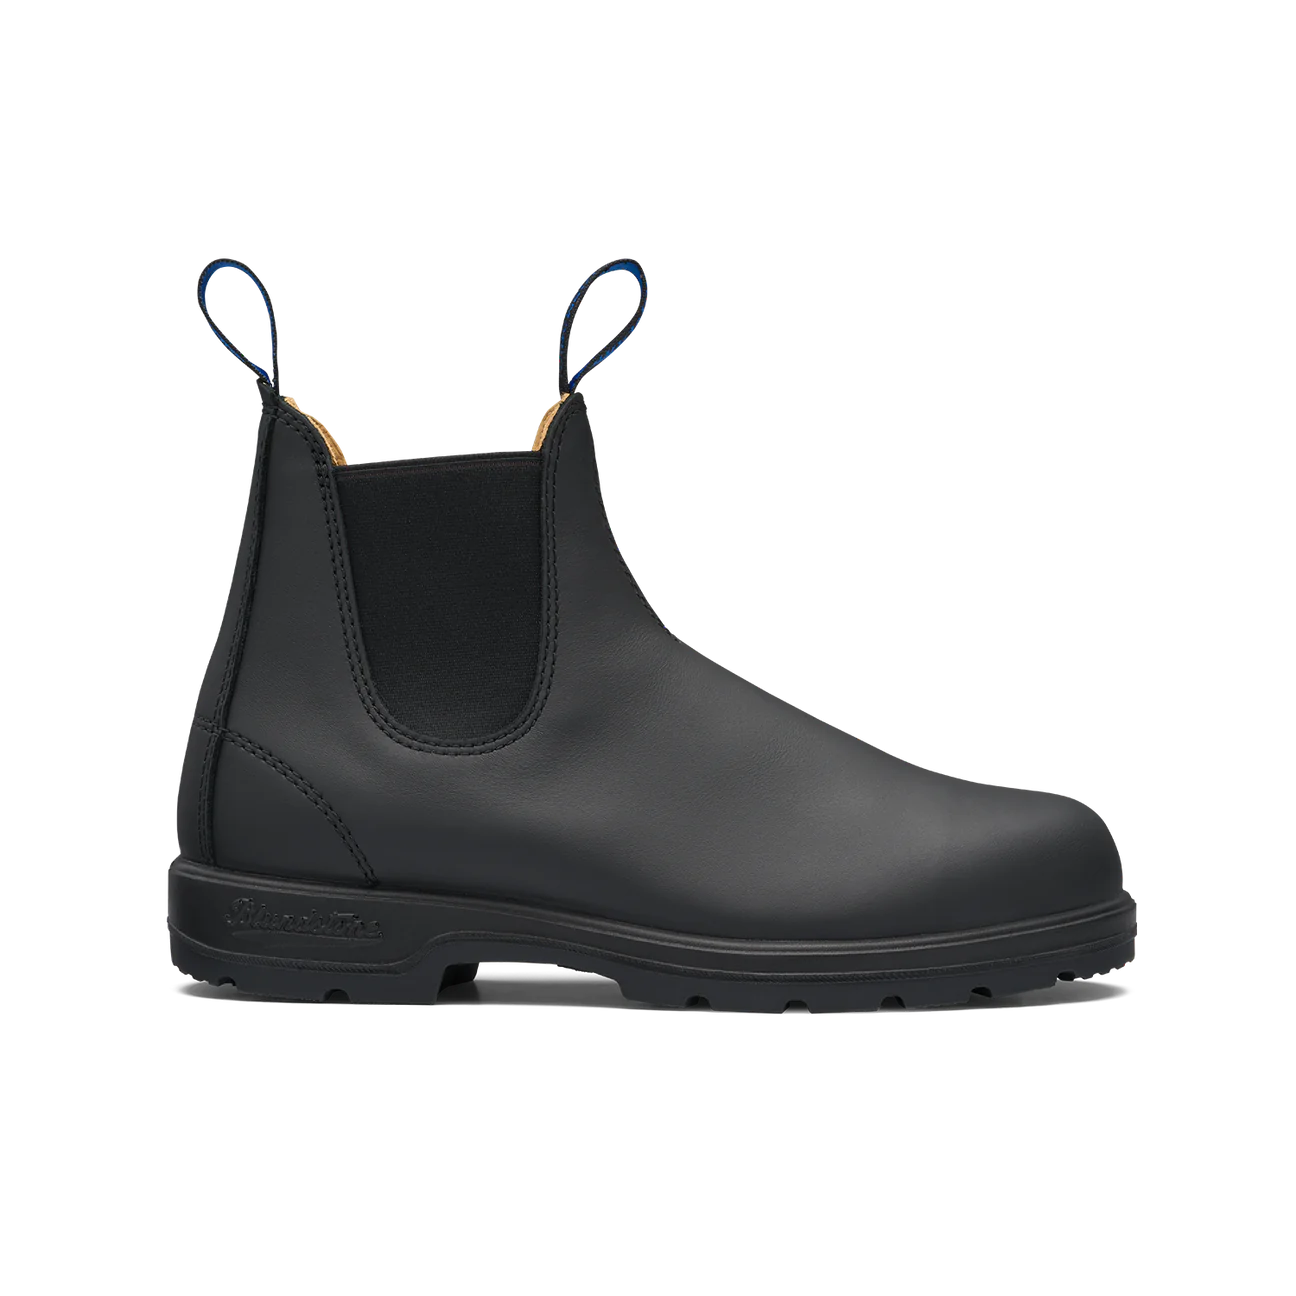 Blundstone 566 Winter Thermal Classic Boots